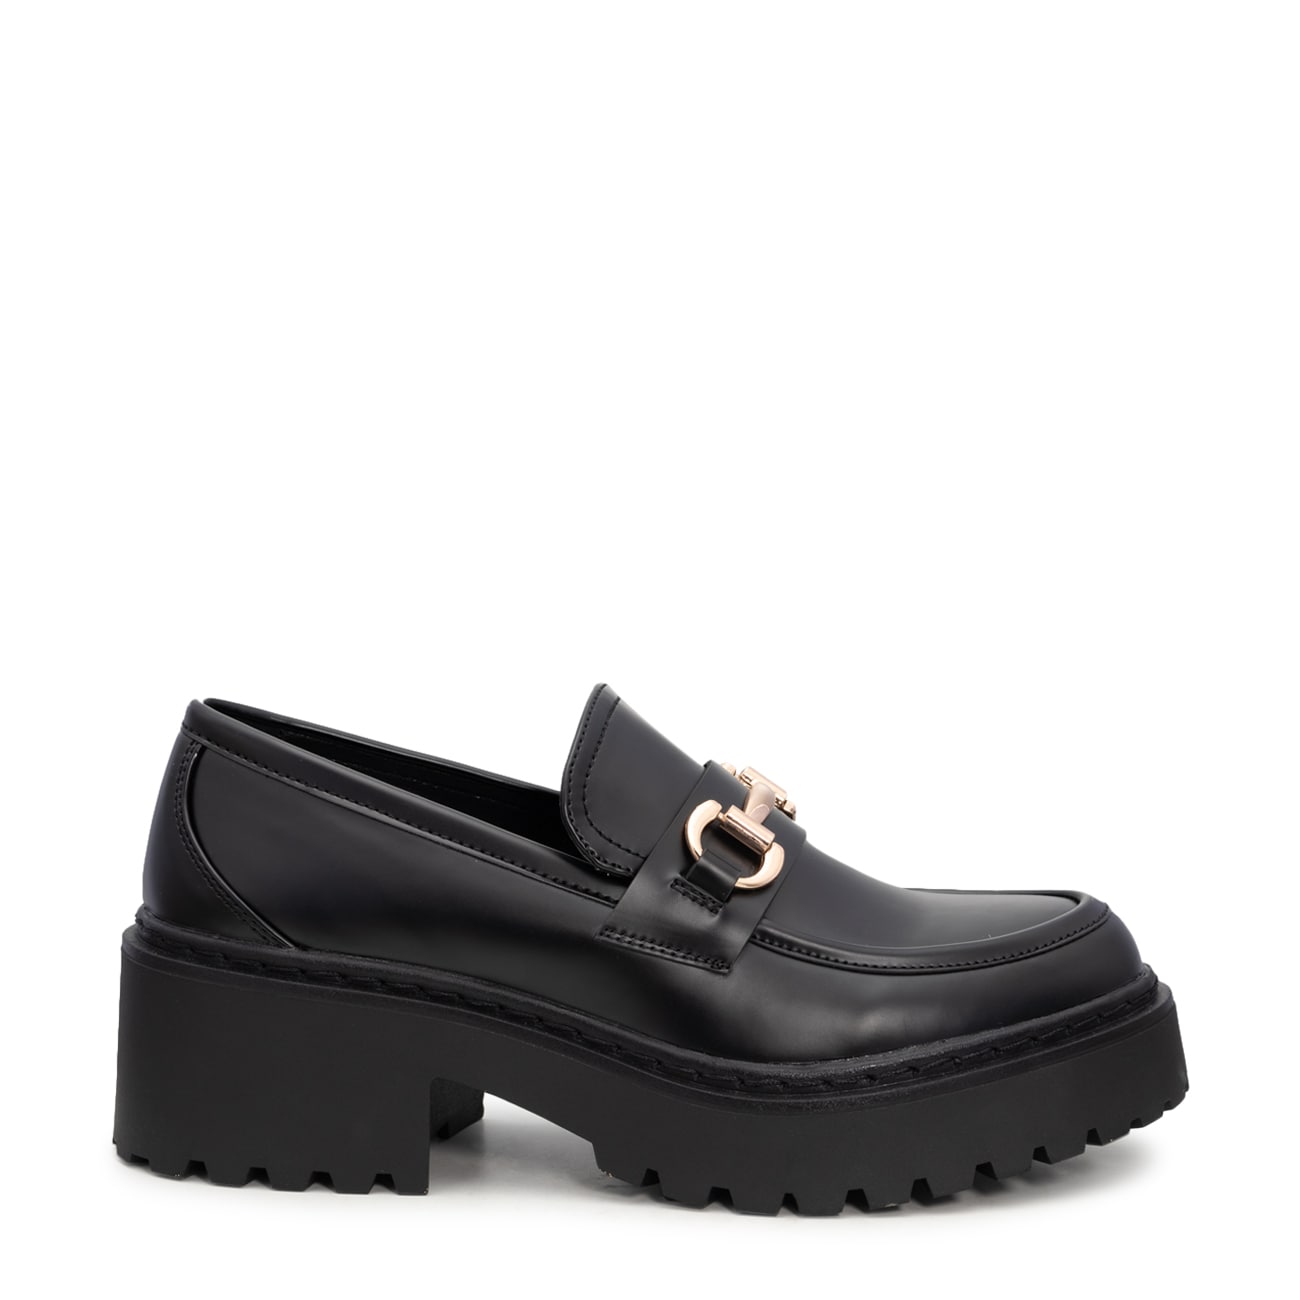 Steve Madden Approach Loafer | The Shoe Company